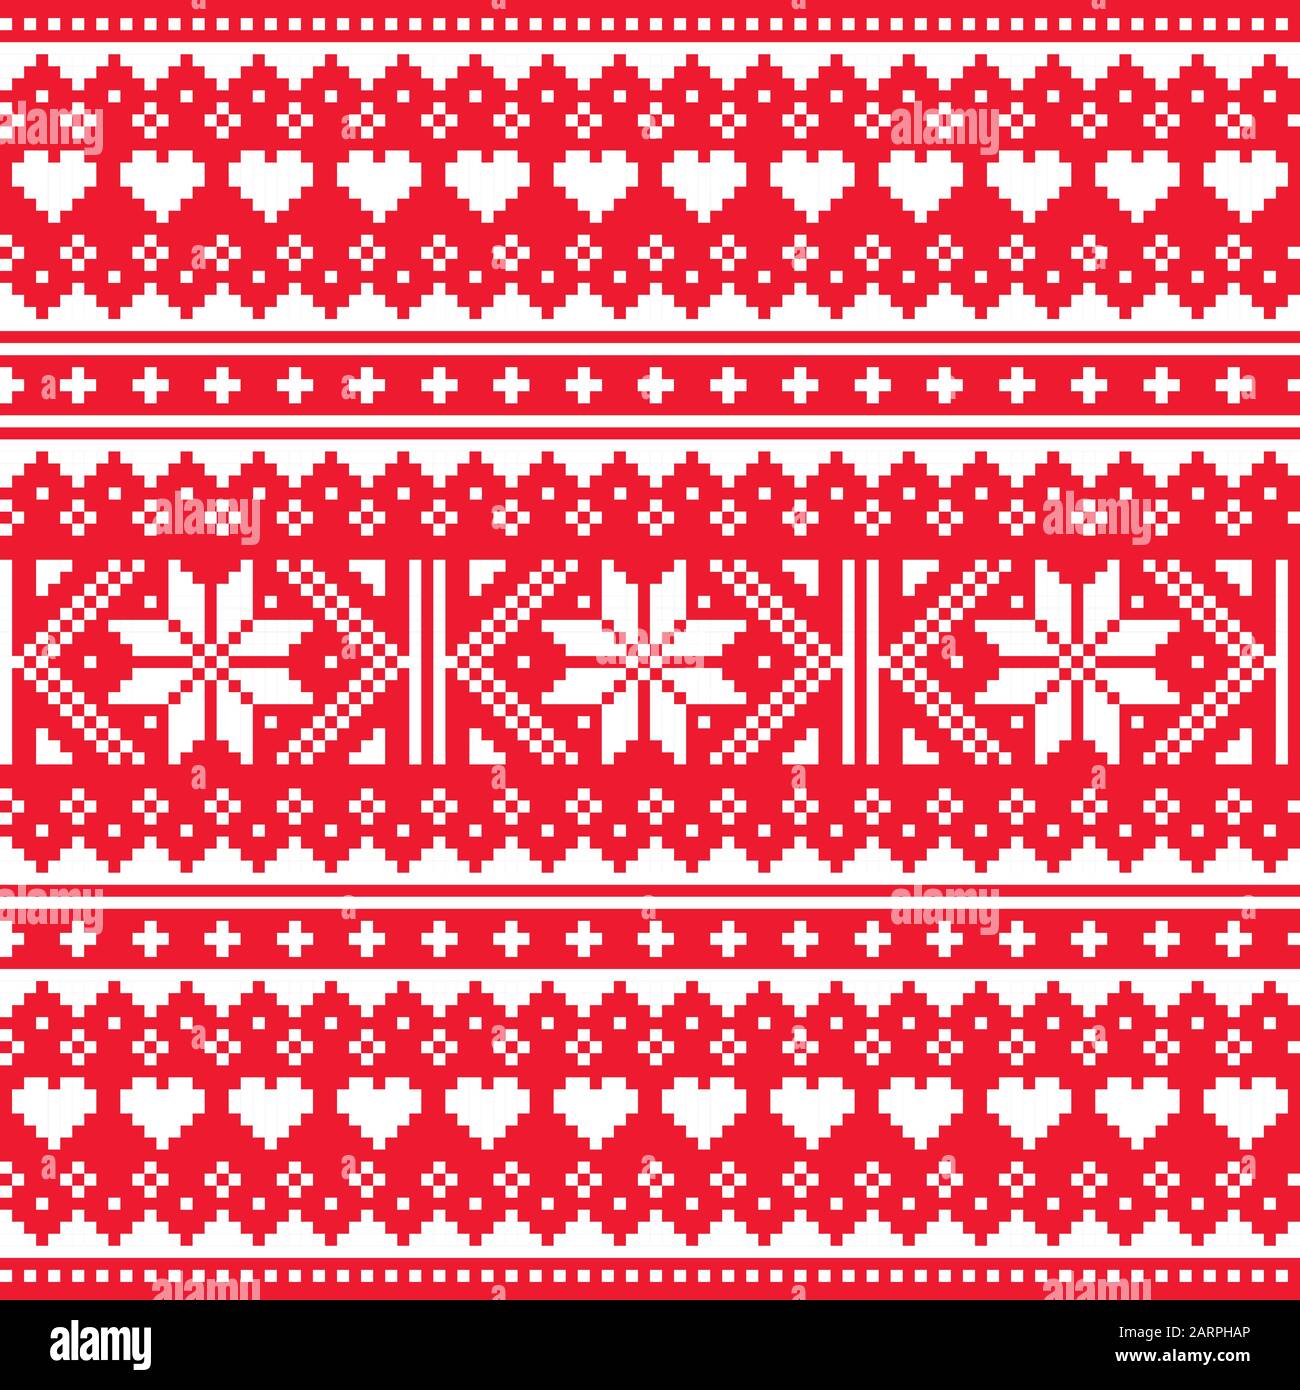 Love, Valentine's Day knitwear vector seamless pattern -  Fair Isle style traditional knit design with hearts Stock Vector